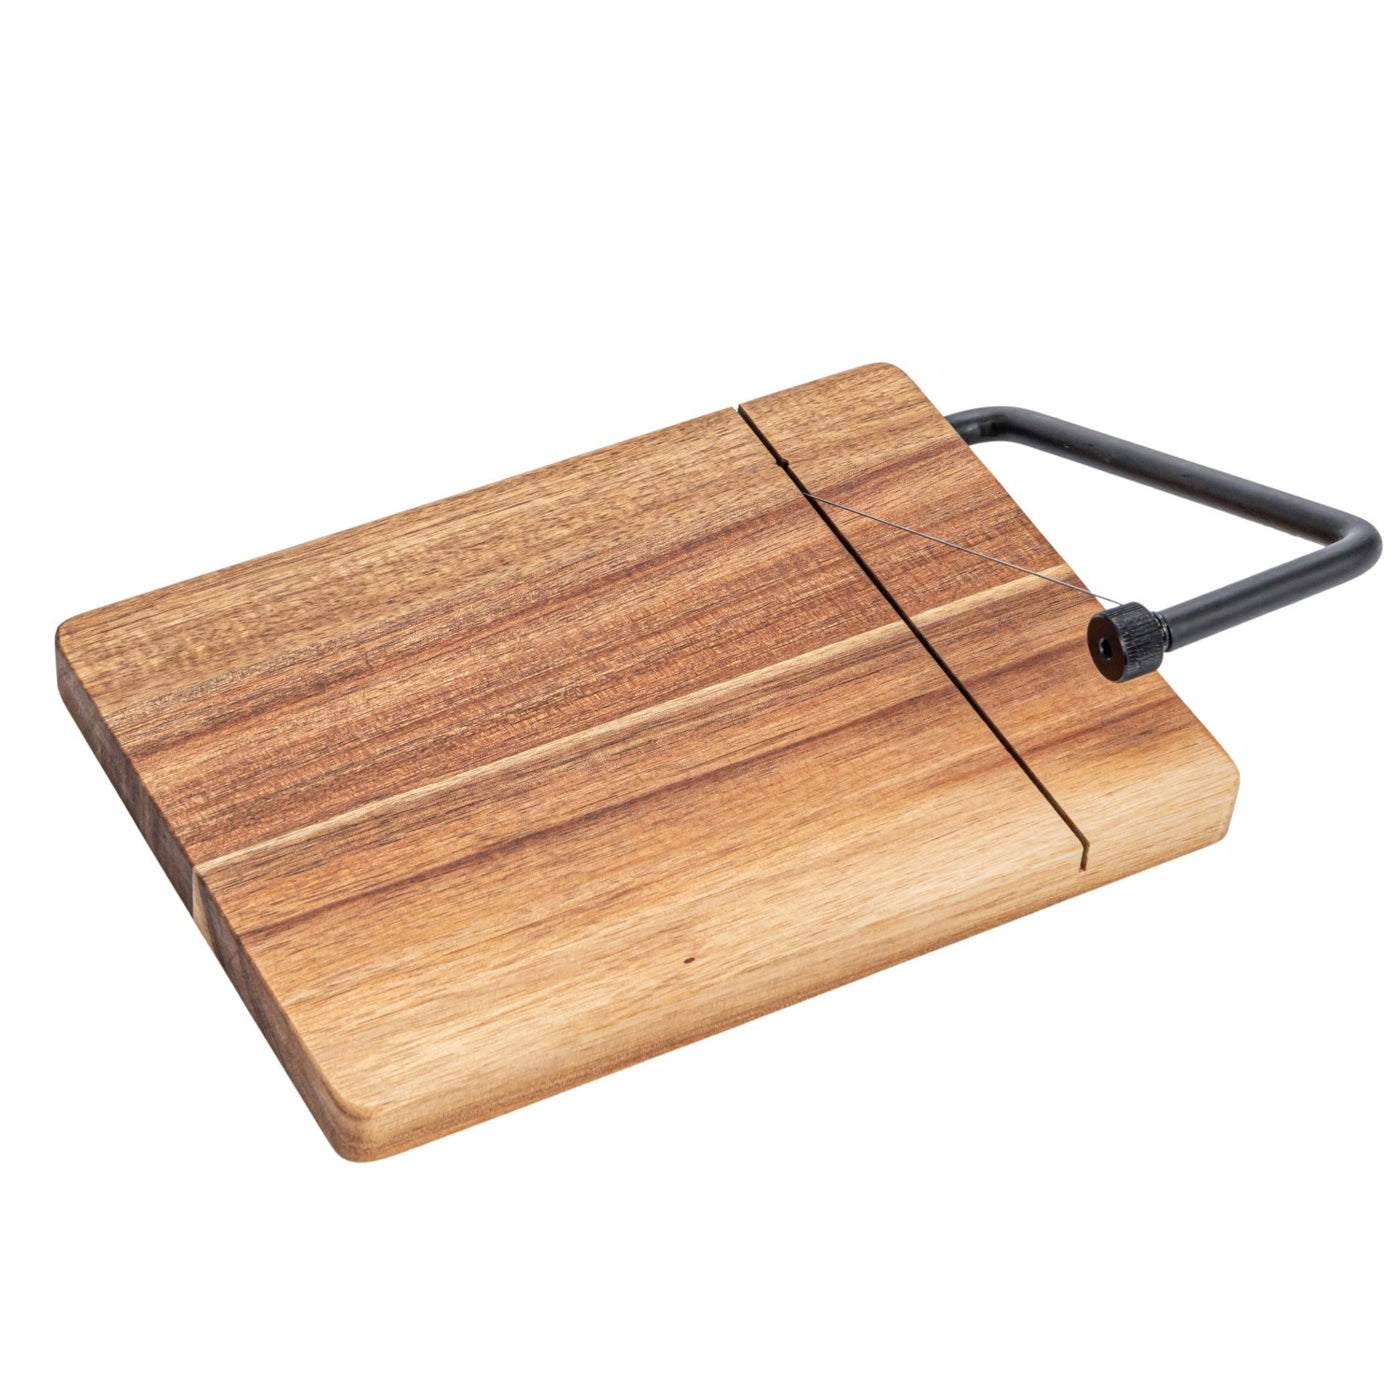 Acacia Wood & Stainless Steel Cheese Slicer, Natural & Black